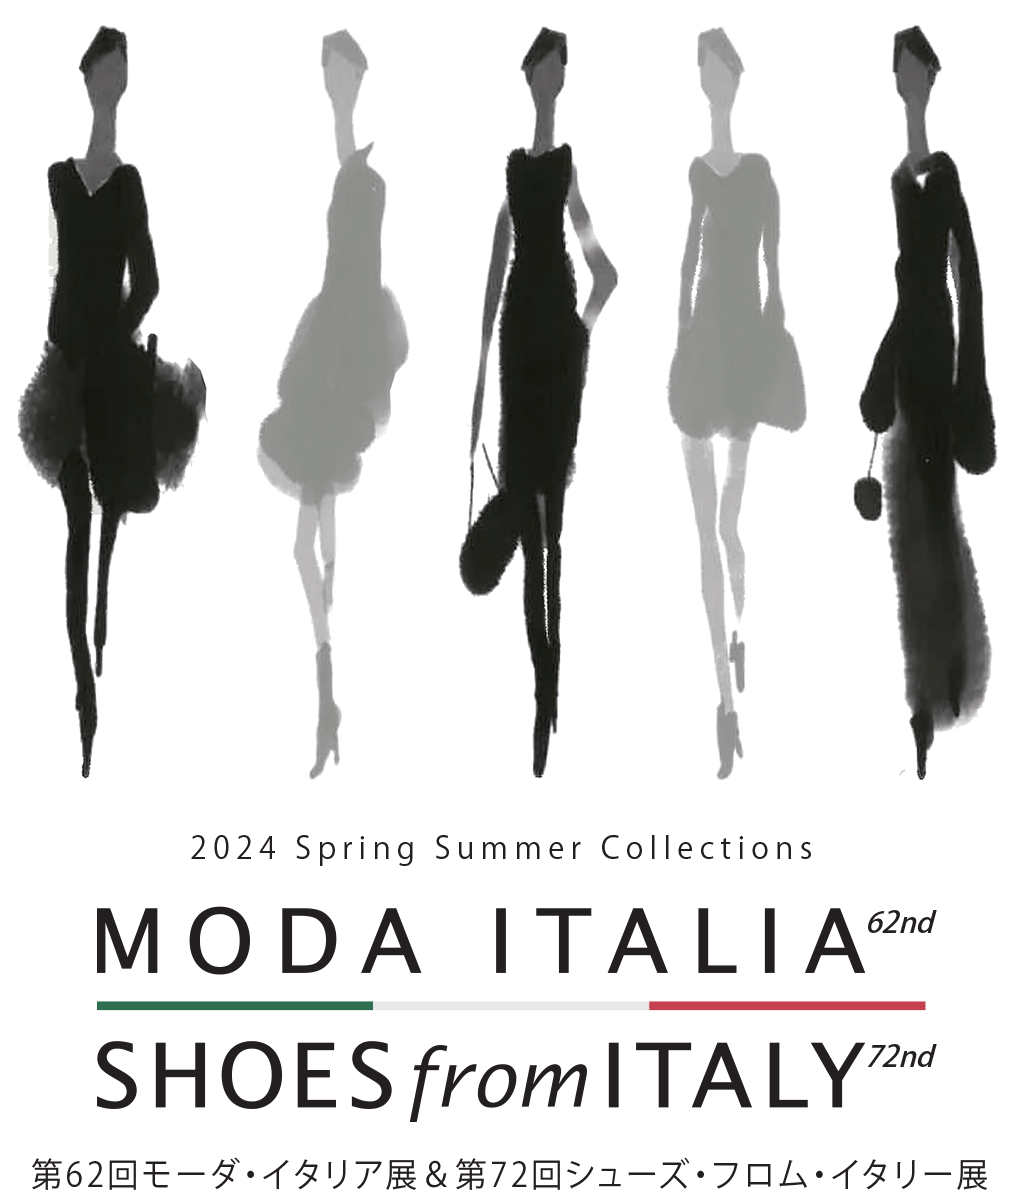 2022 spring summer Collections MODA ITALIA 60th & SHOES from ITALY 70th